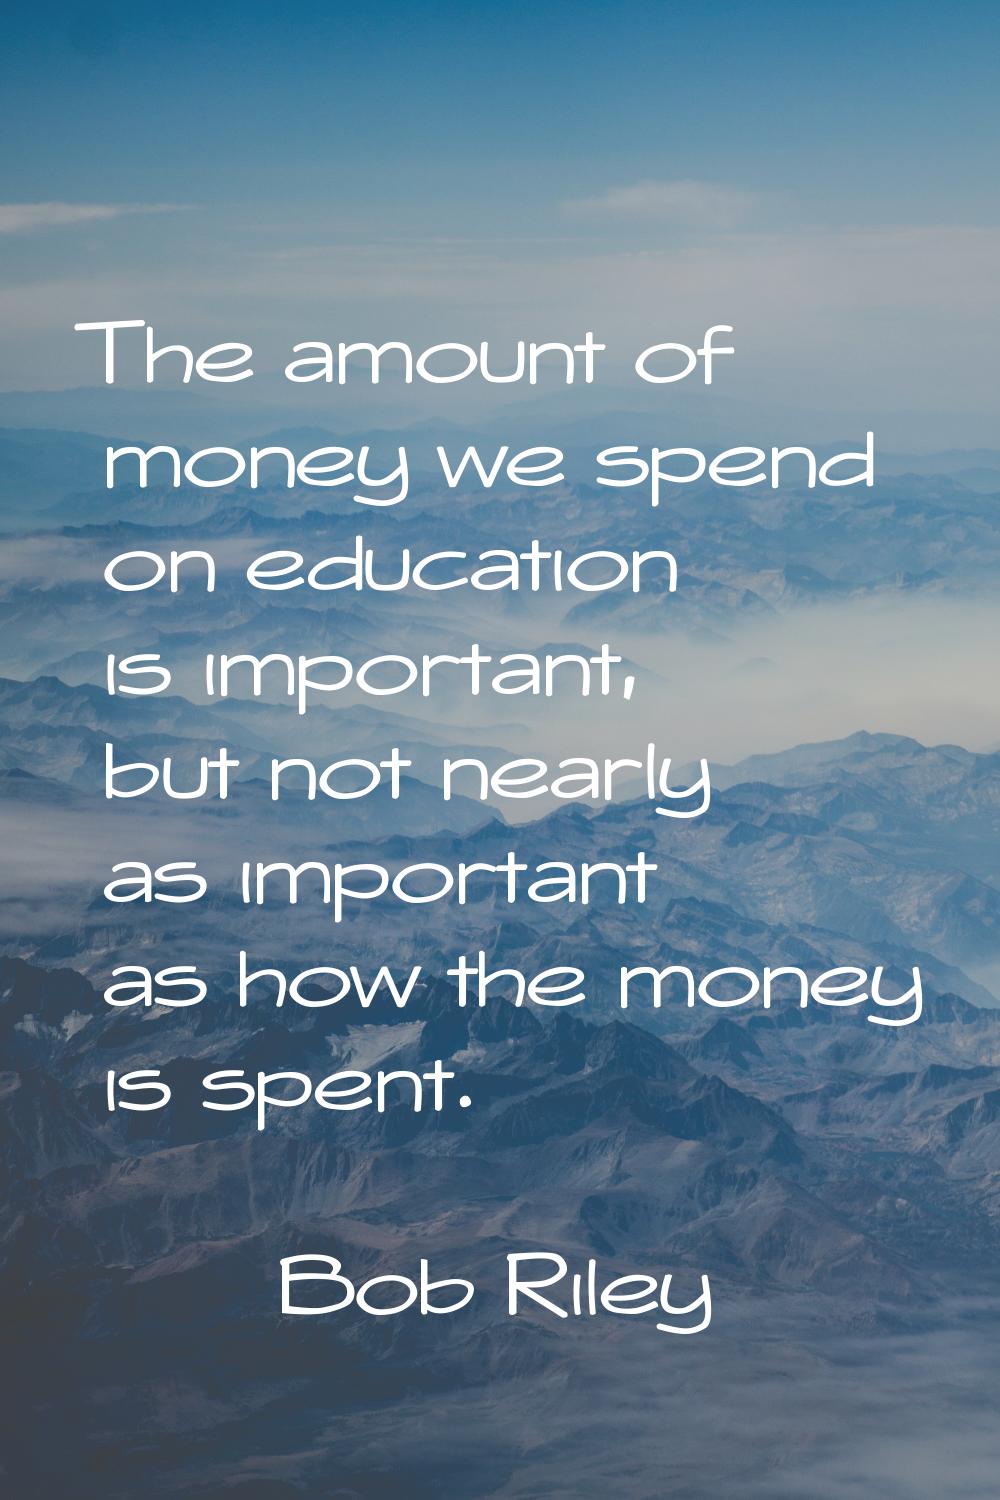 The amount of money we spend on education is important, but not nearly as important as how the mone